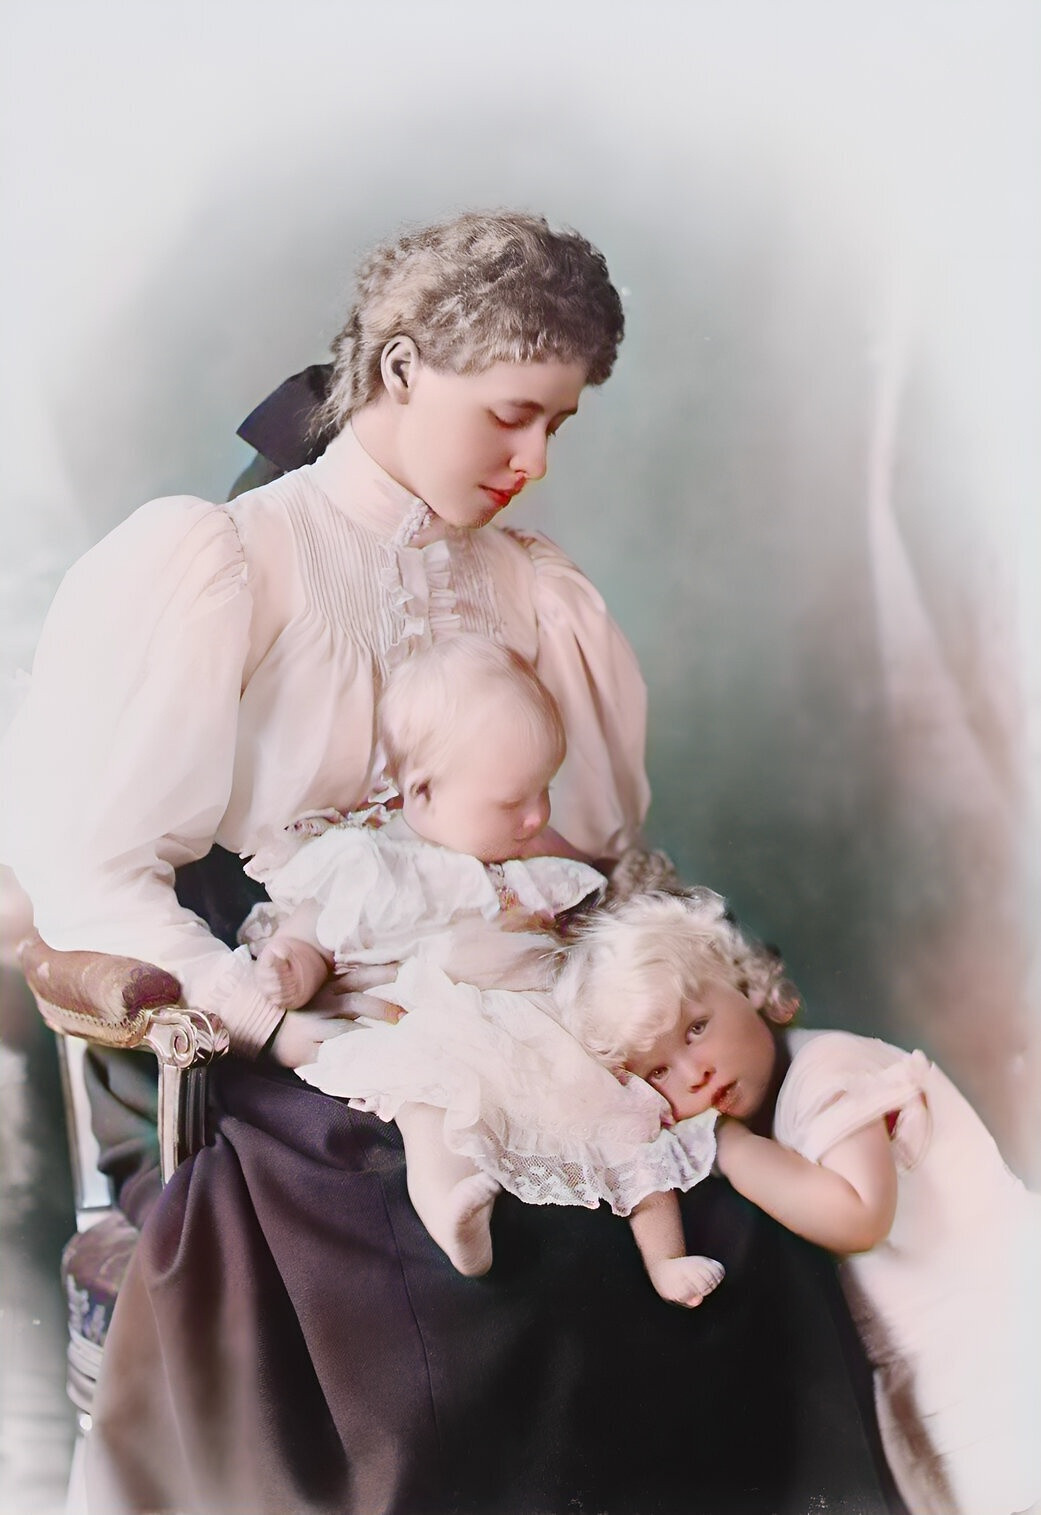 Princess Marie (known as Missy) and her children, Prince Carol and Princess Elizabeth, 1895